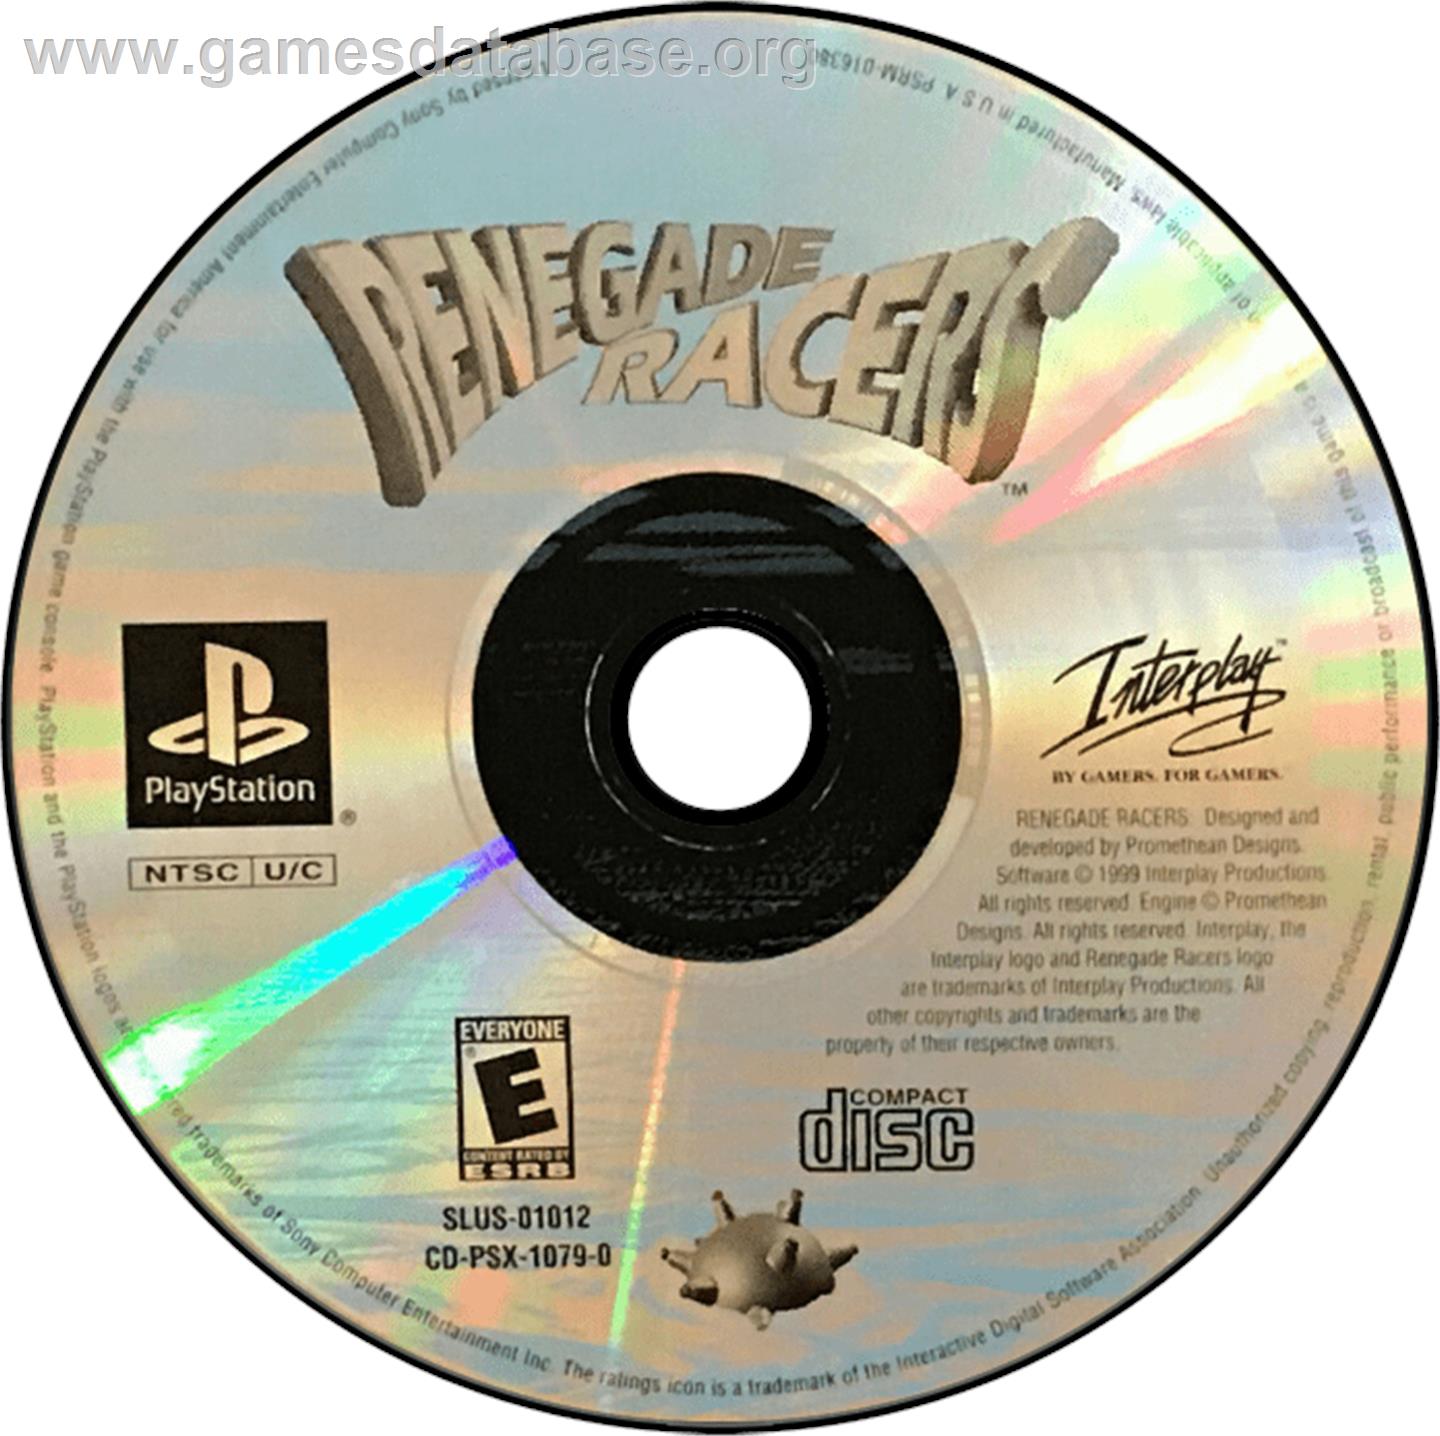 Renegade Racers - Sony Playstation - Artwork - Disc